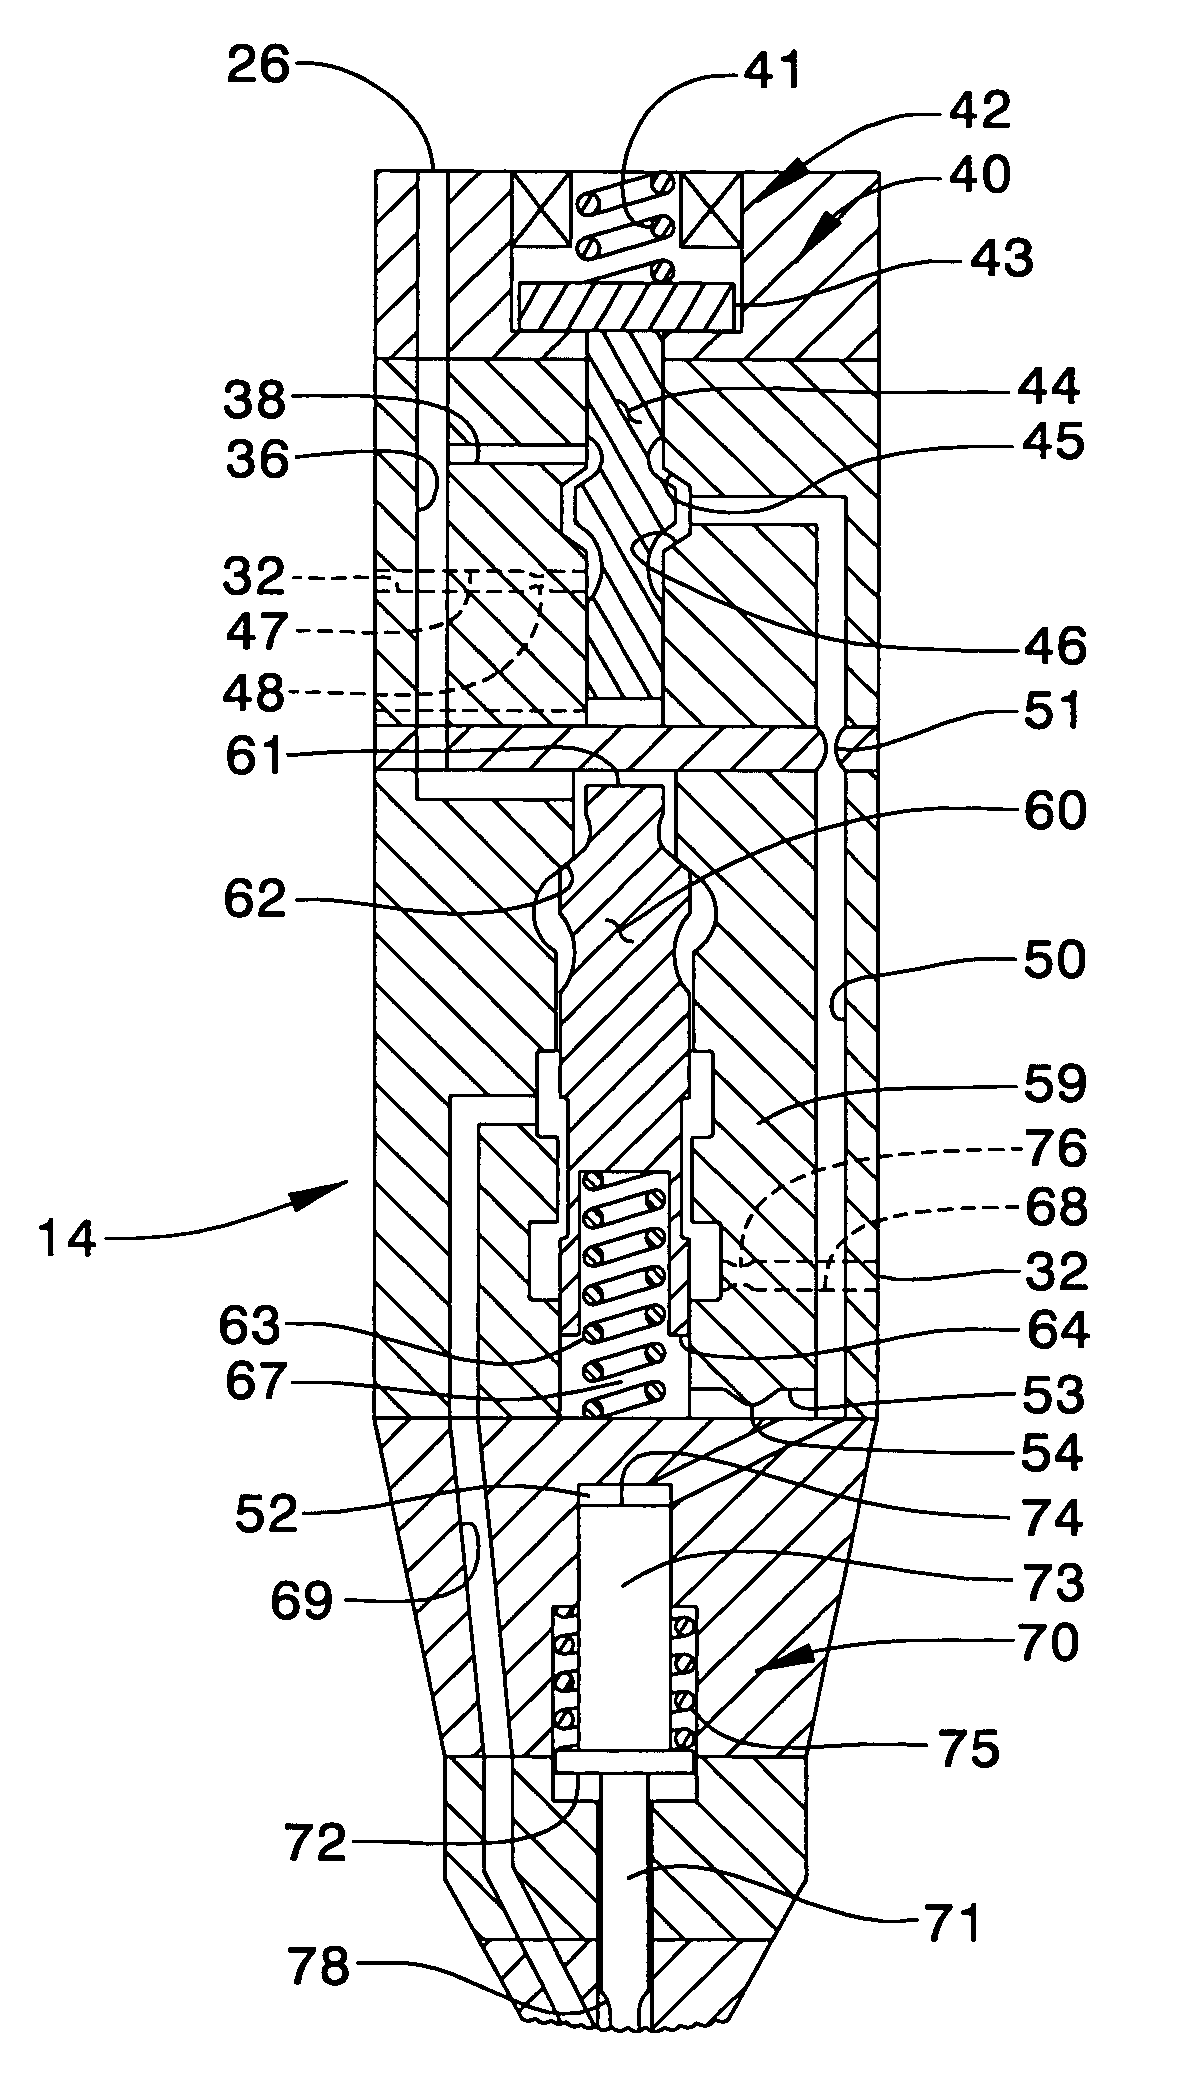 Single fluid injector with rate shaping capability